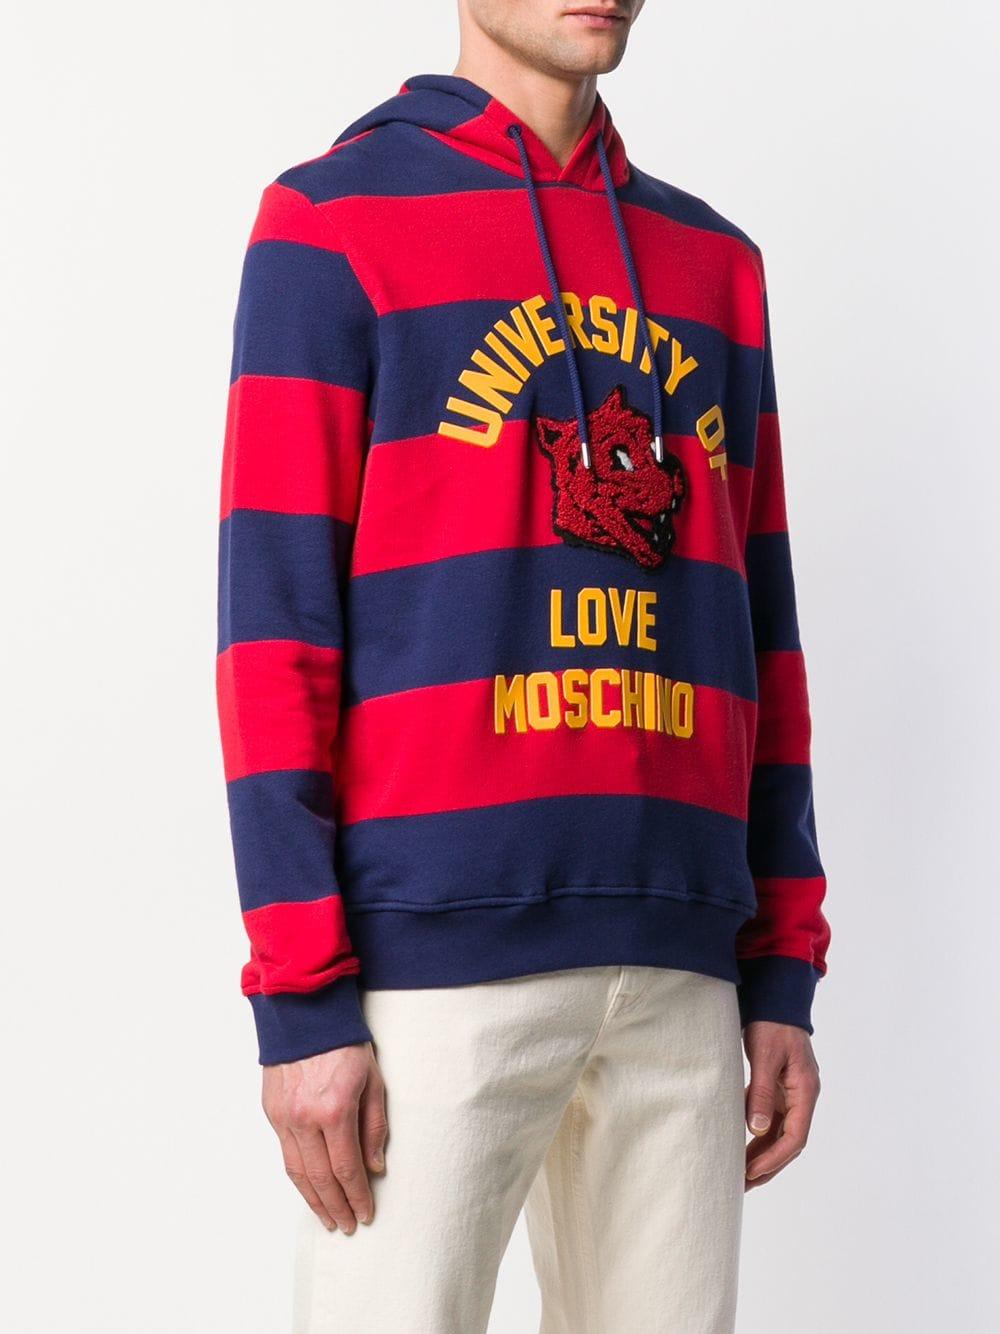 Love Moschino Cotton University Striped Hoodie in Red for Men - Lyst